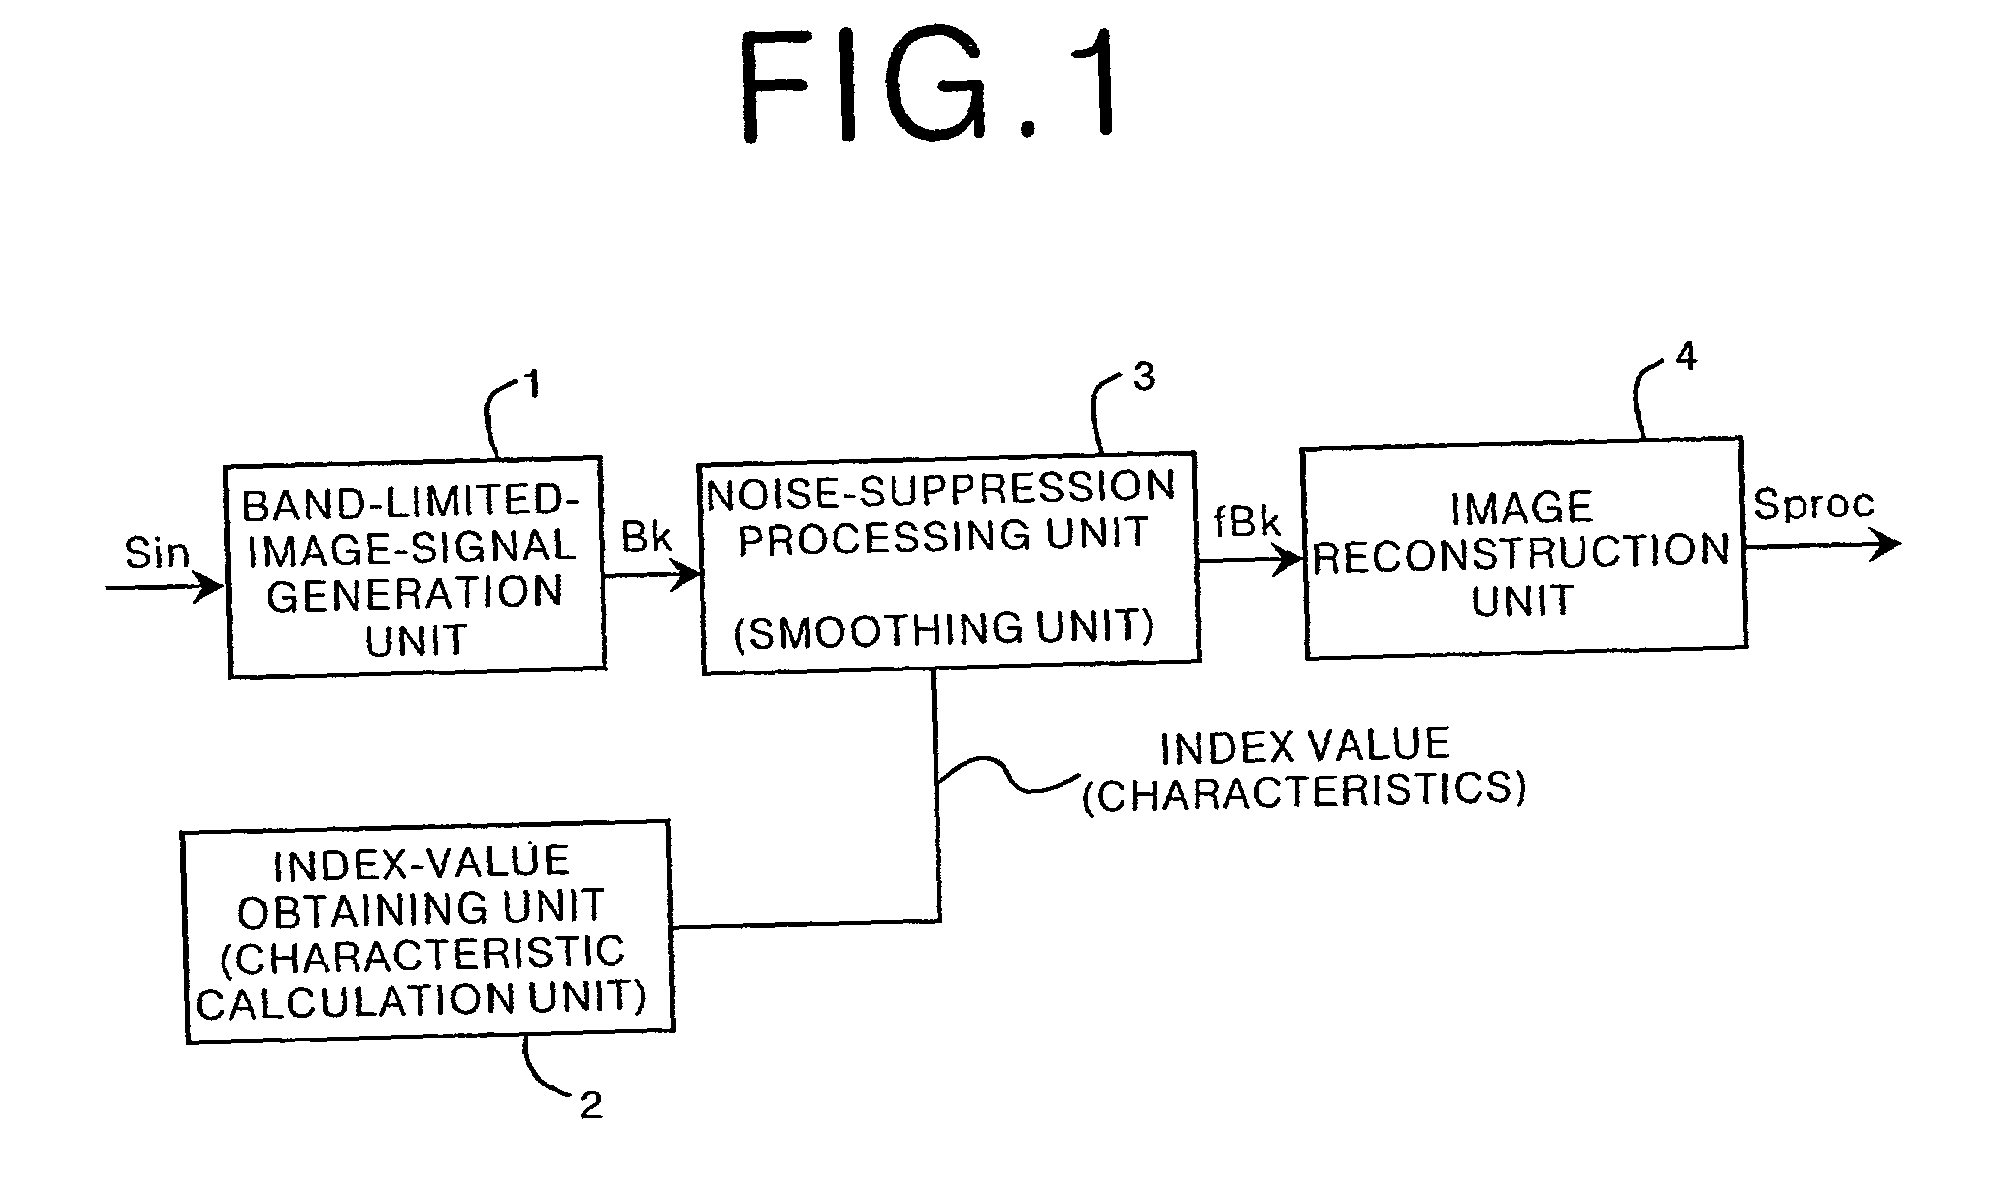 Apparatus for suppressing noise by adapting filter characteristics to input image signal based on characteristics of input image signal